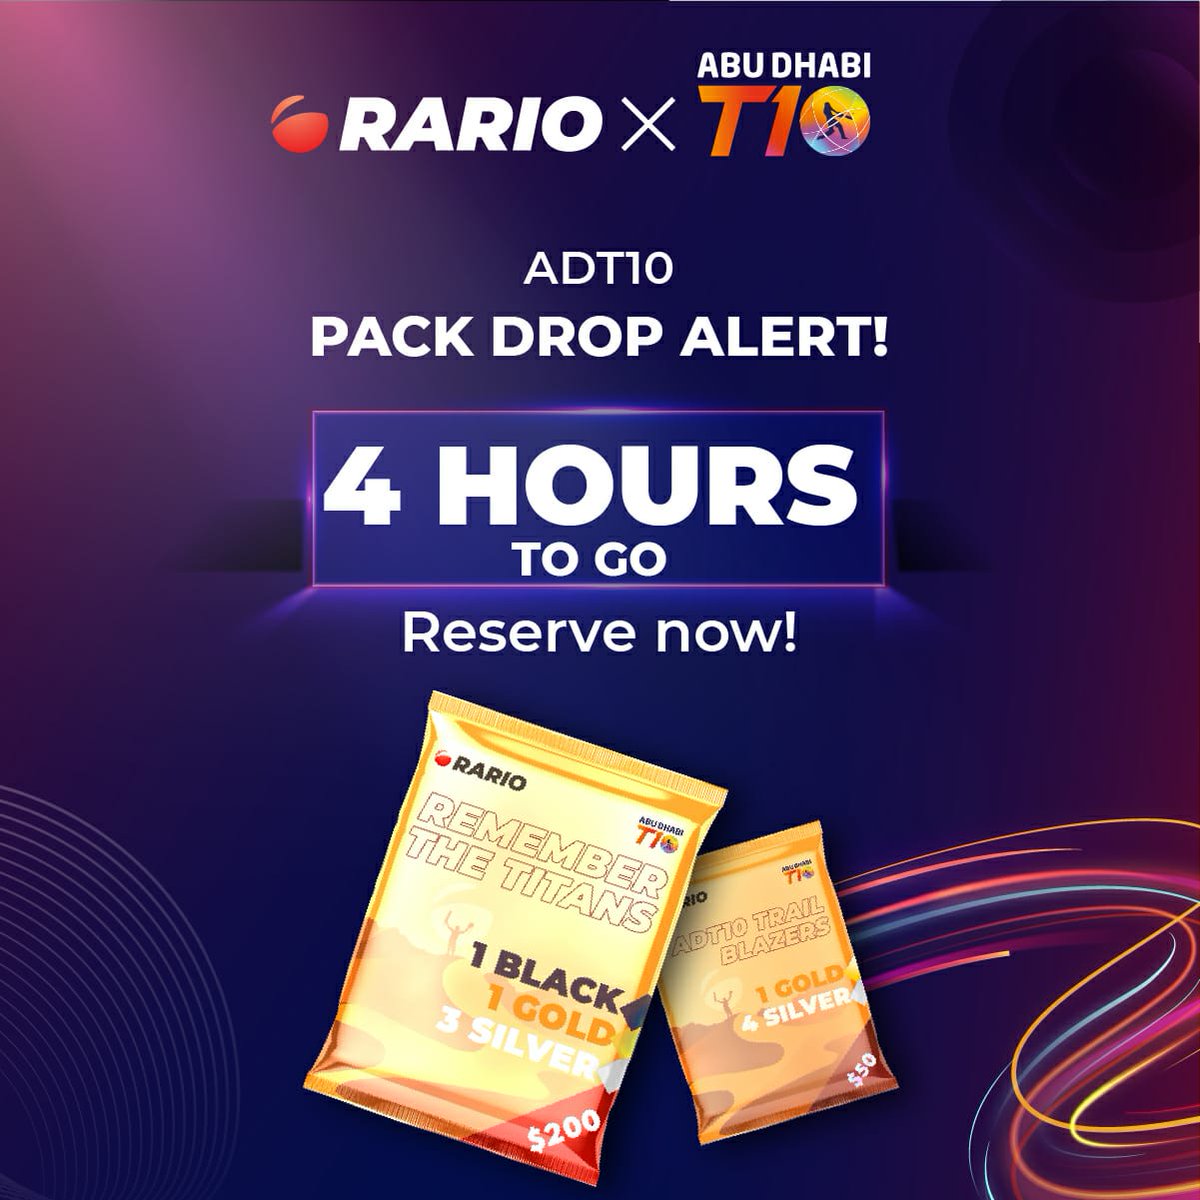 Ihave  got some big news for all cricket fans😻💥 The rariohq ADT10 pack drops  today at 8:00pm. Reserve your packs before they are live for sale✊ 
#RarioPackDrop